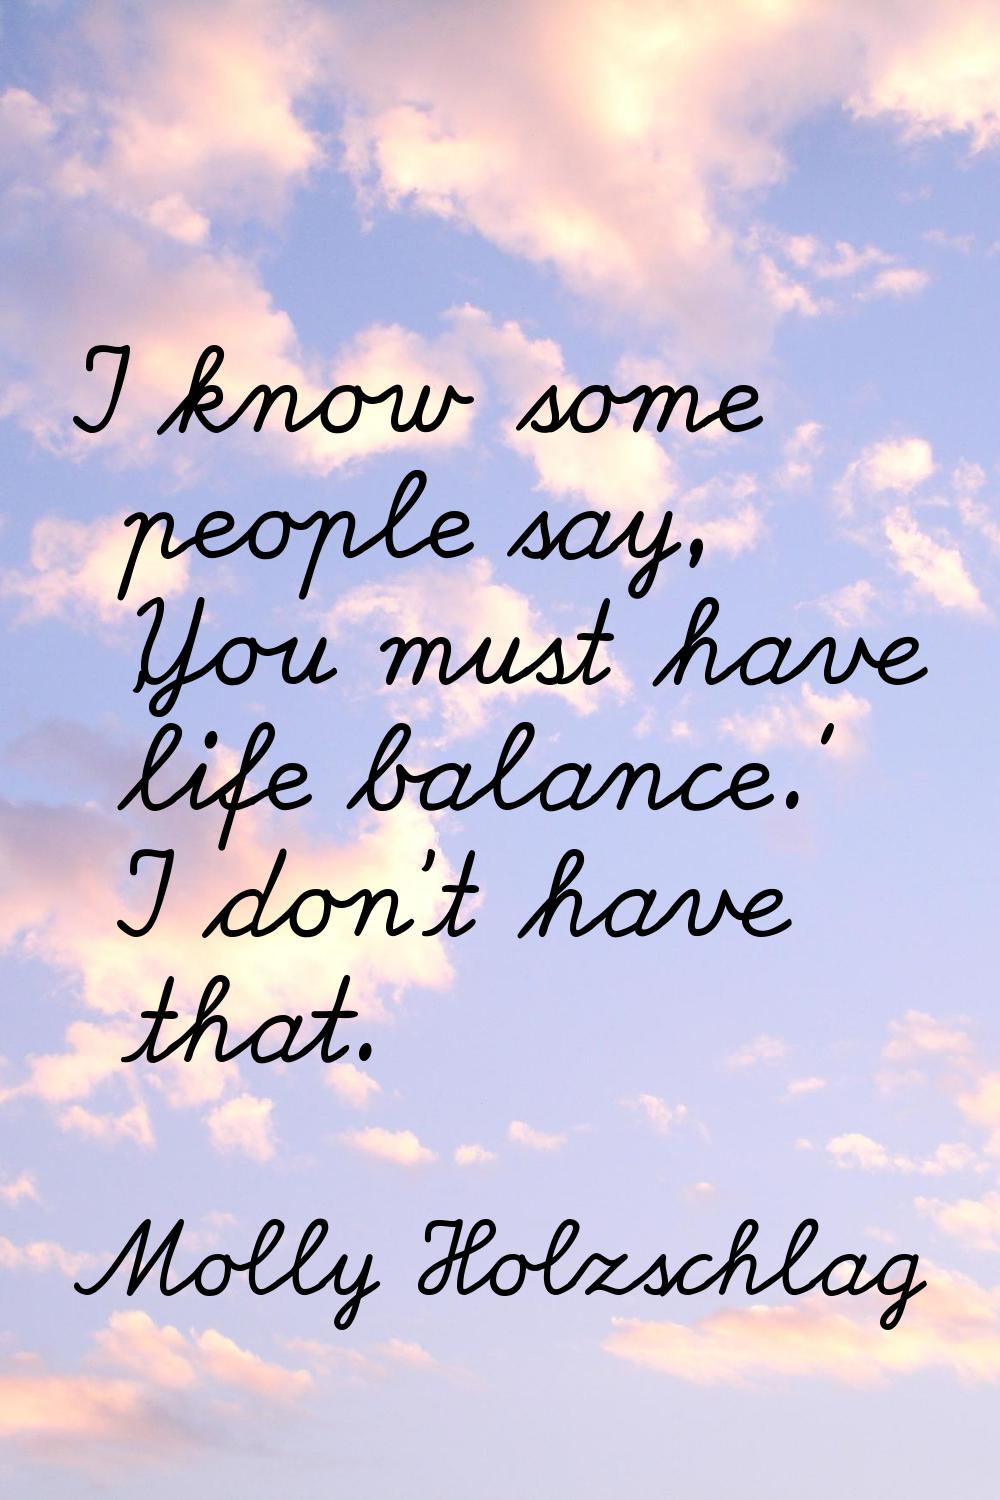 I know some people say, 'You must have life balance.' I don't have that.